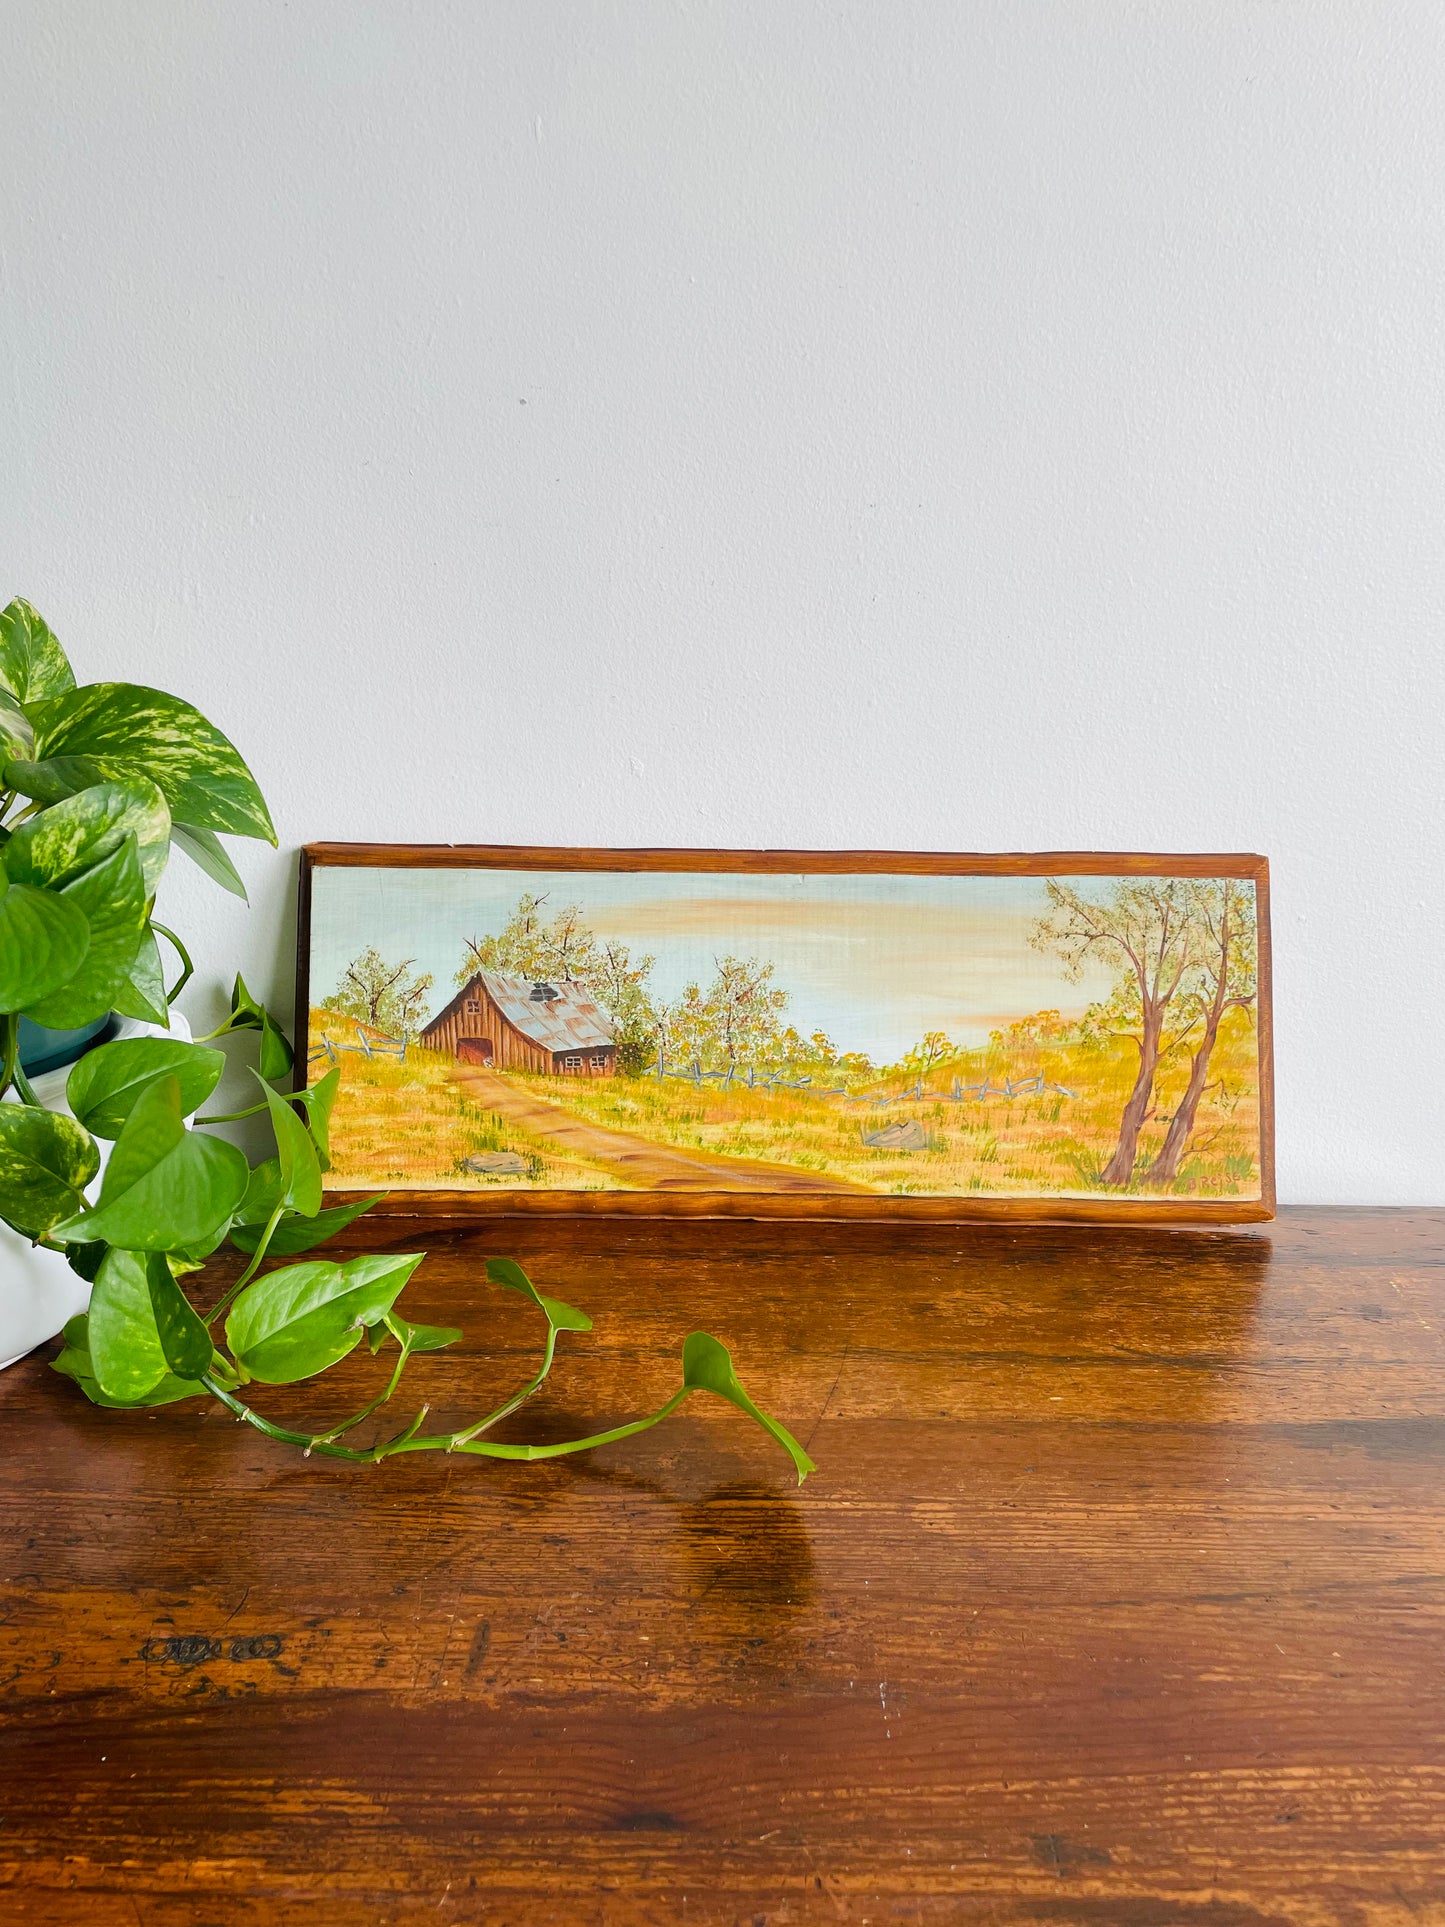 Original Art - Painting of Cabin & Nature on Wood Plank